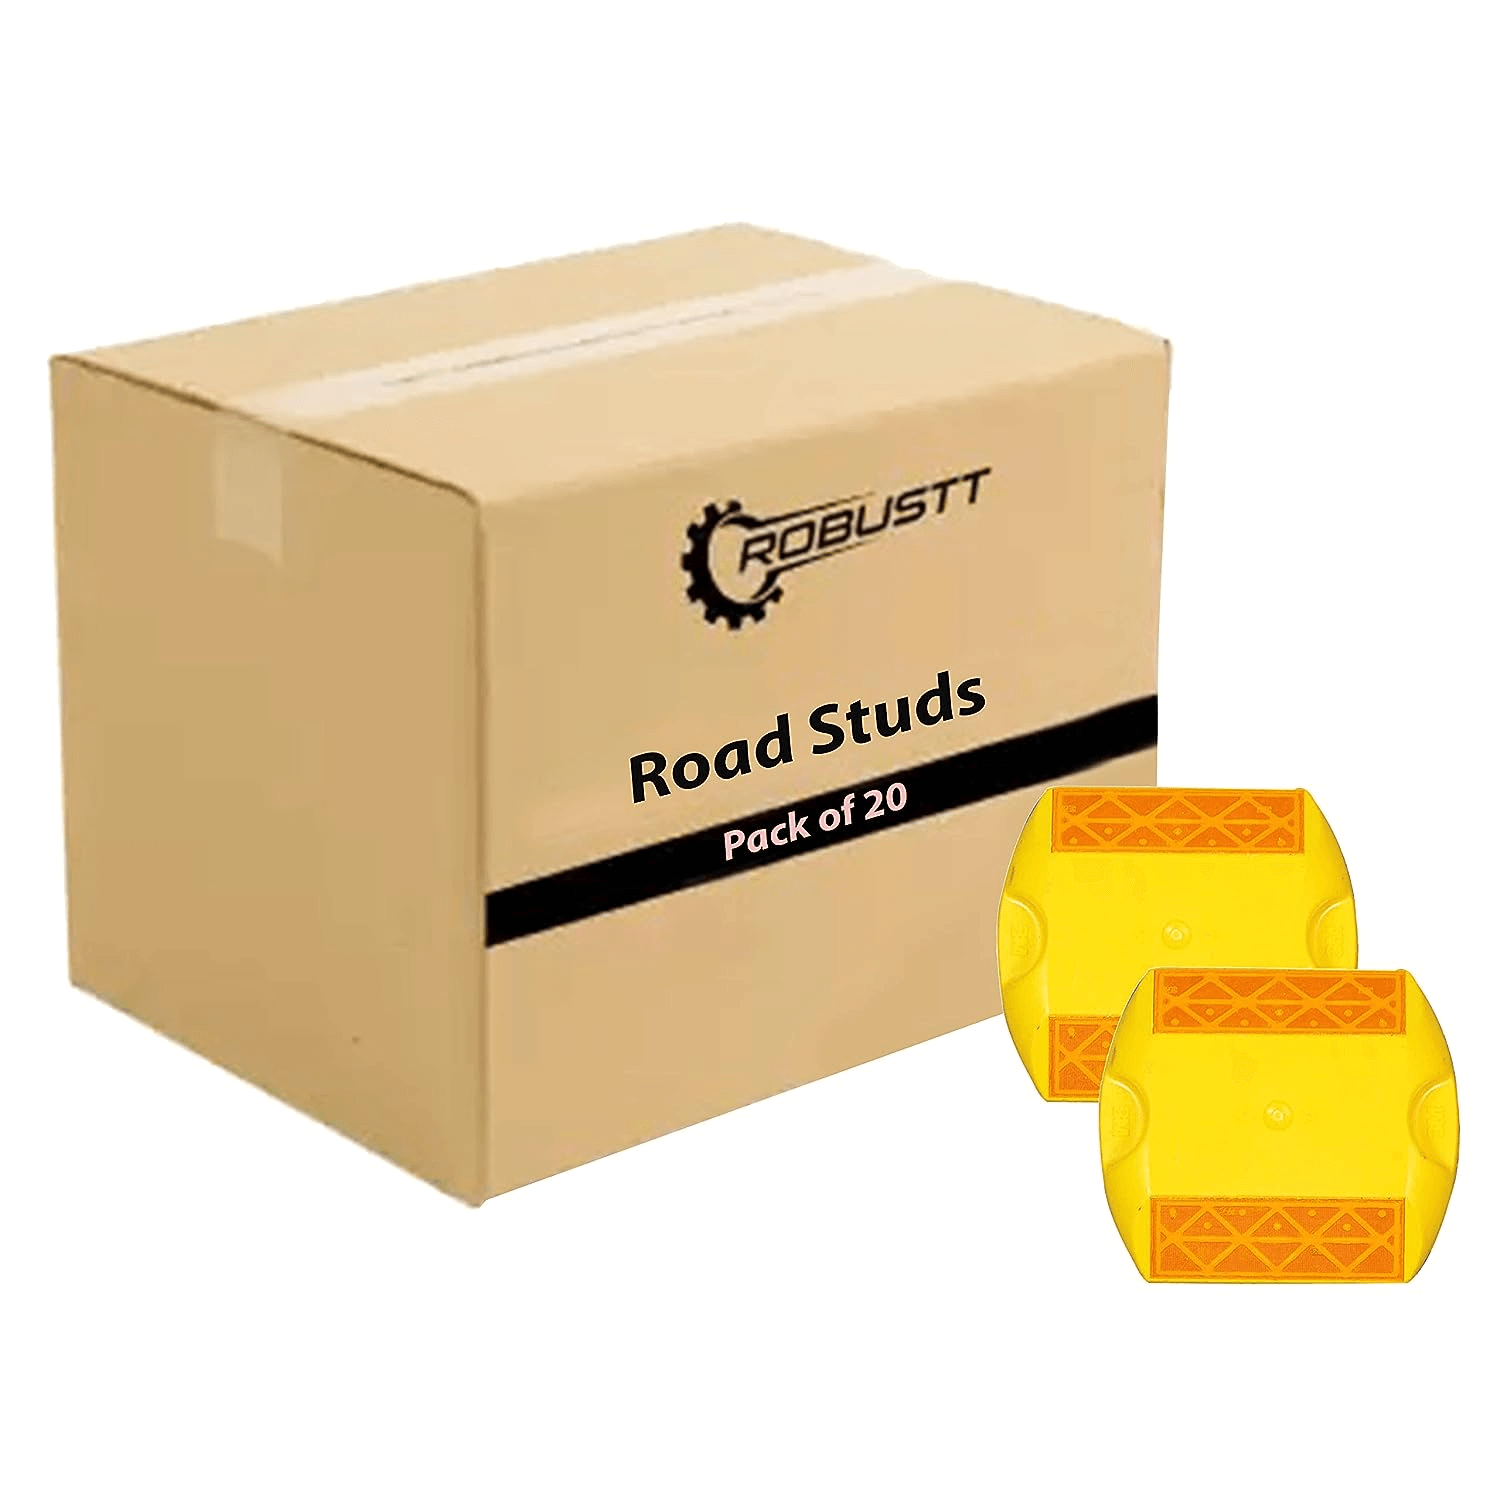 robustt-road-reflector-yellow-and-red-plastic-abs-road-stud-set-of-20-pieces